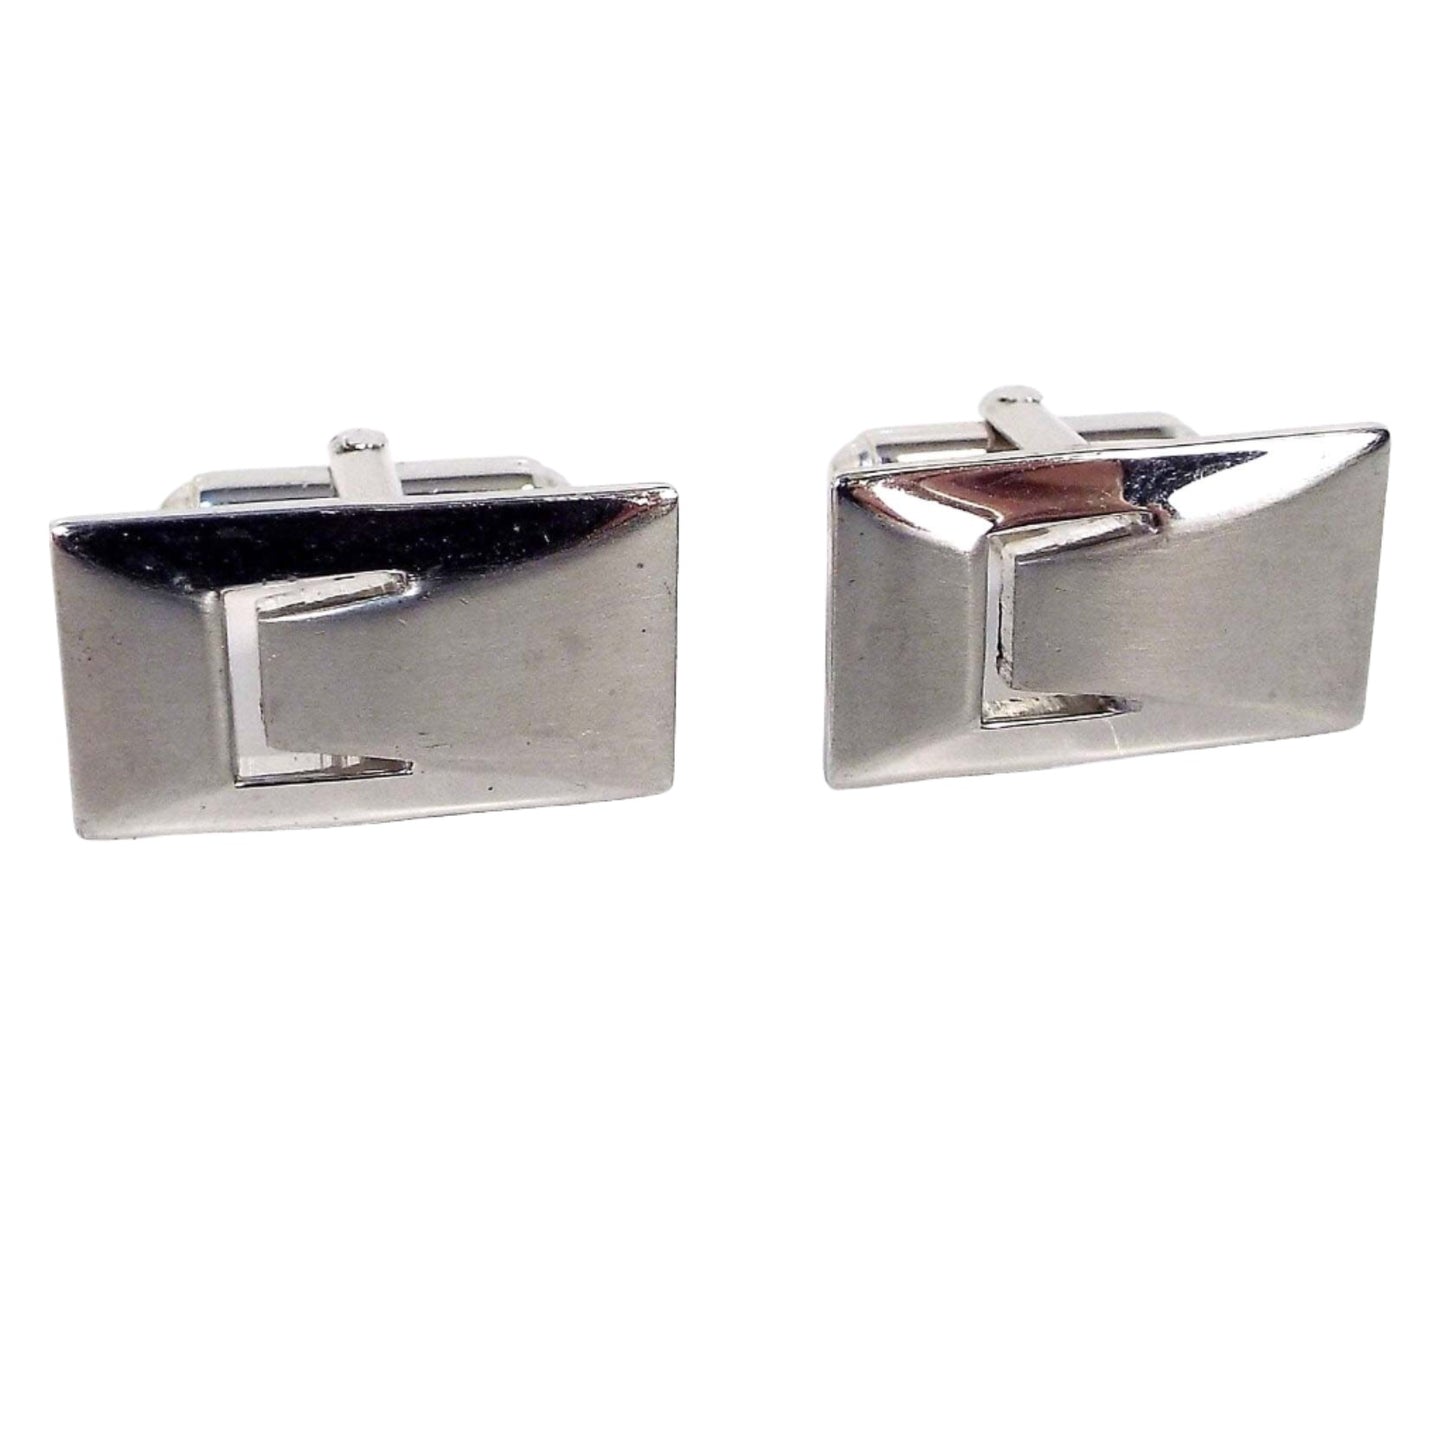 Front view of the Mid Century vintage Anson Modernist style cufflinks. They are silver tone in color and rectangular in shape. There is a cut out similar to the letter C on the left side.